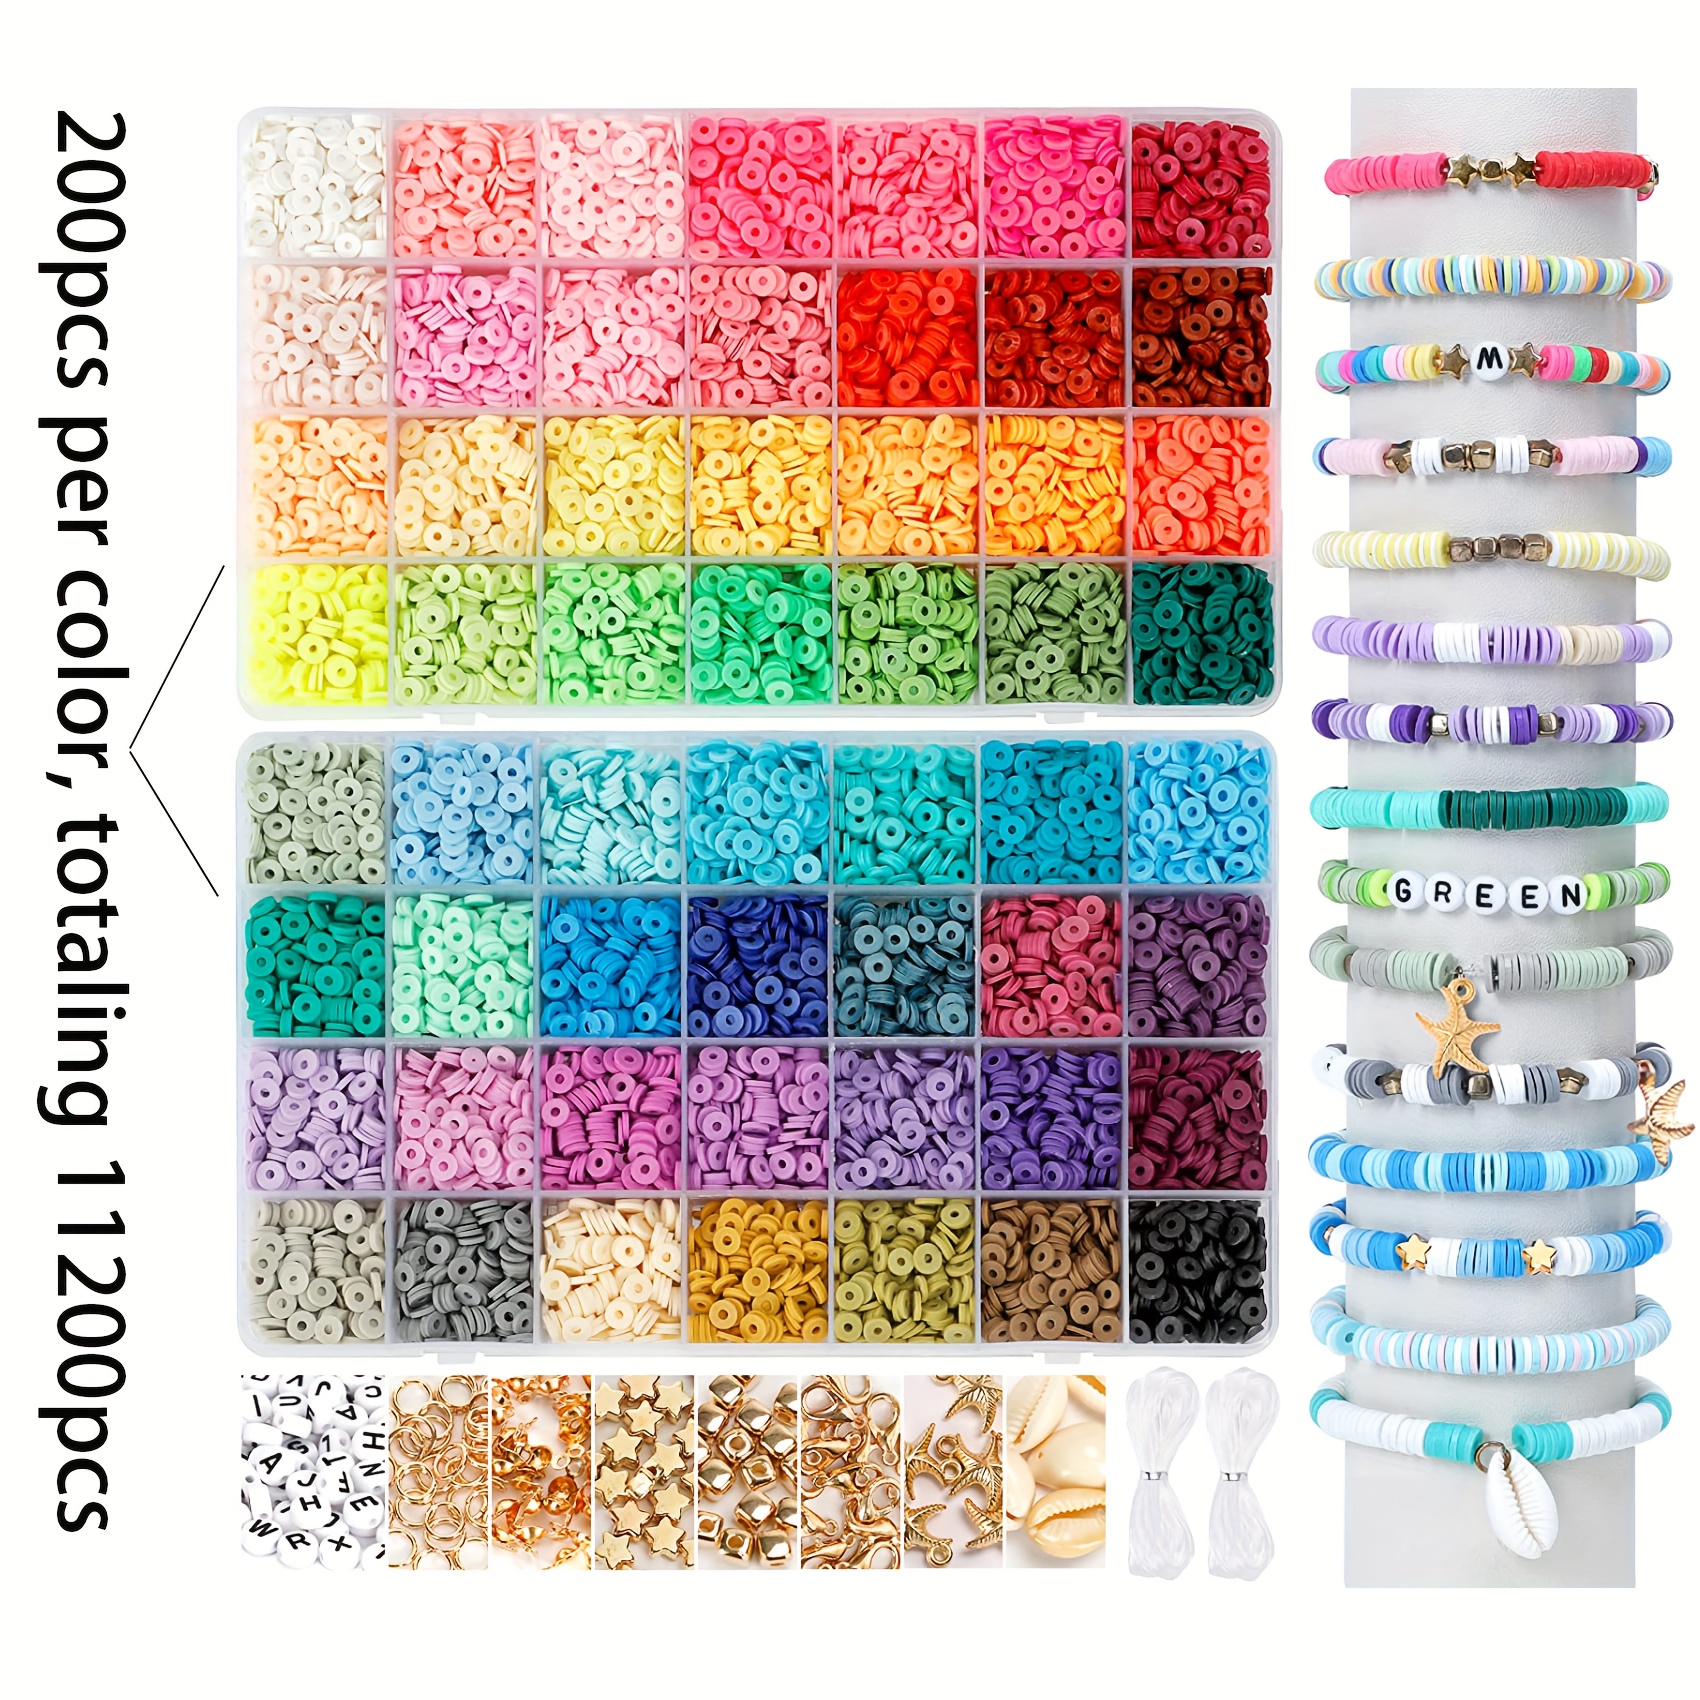 Beads Pendant Charms Kit And Elastic Strings